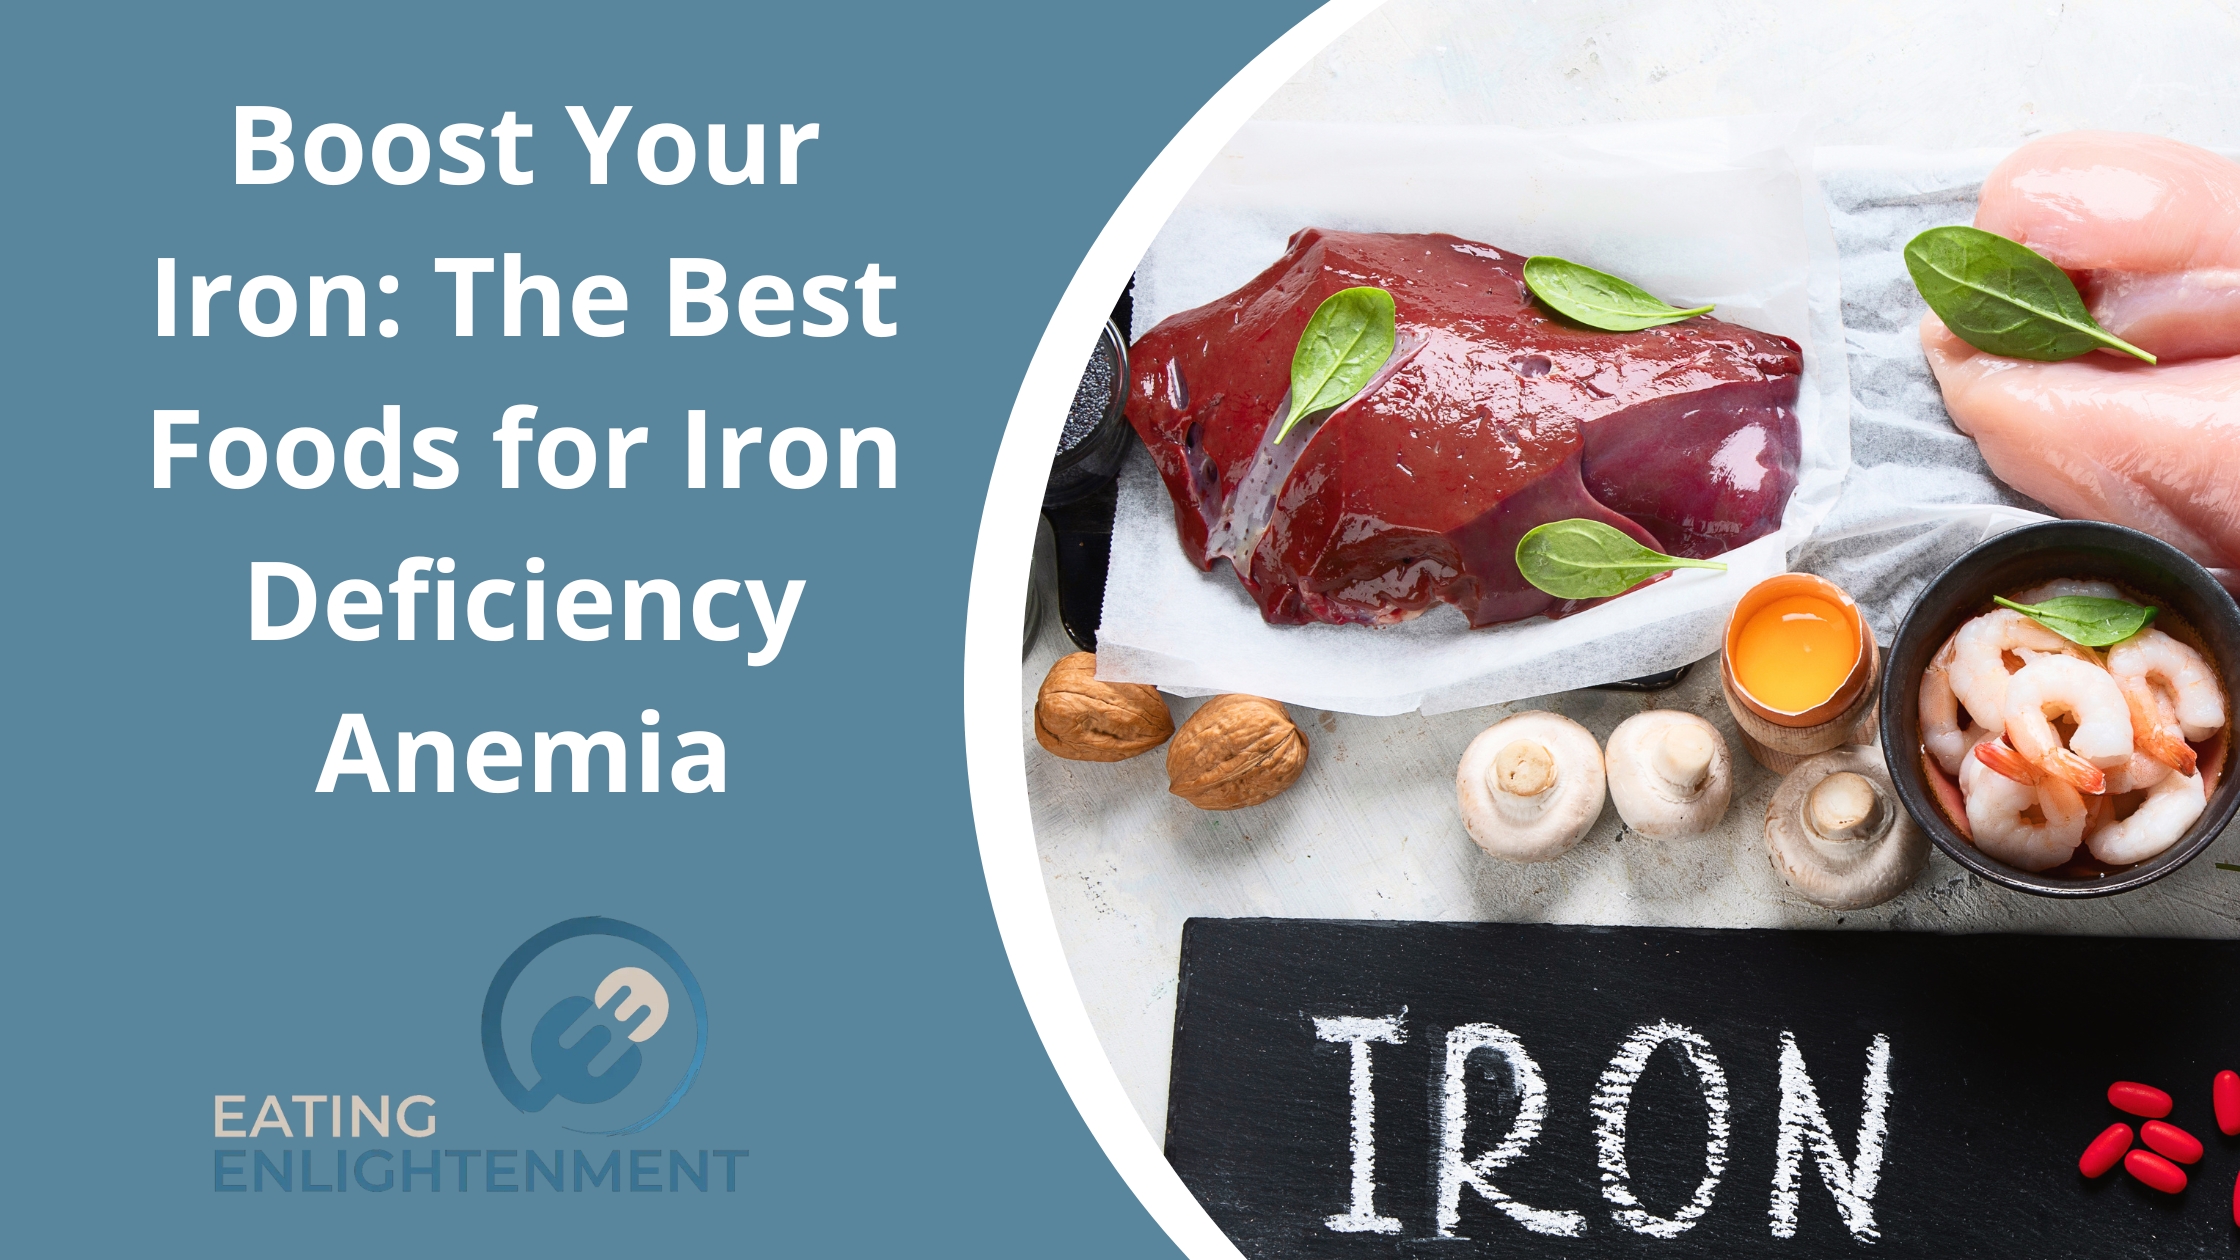 Boost Your Iron: The Best Foods for Iron Deficiency Anemia